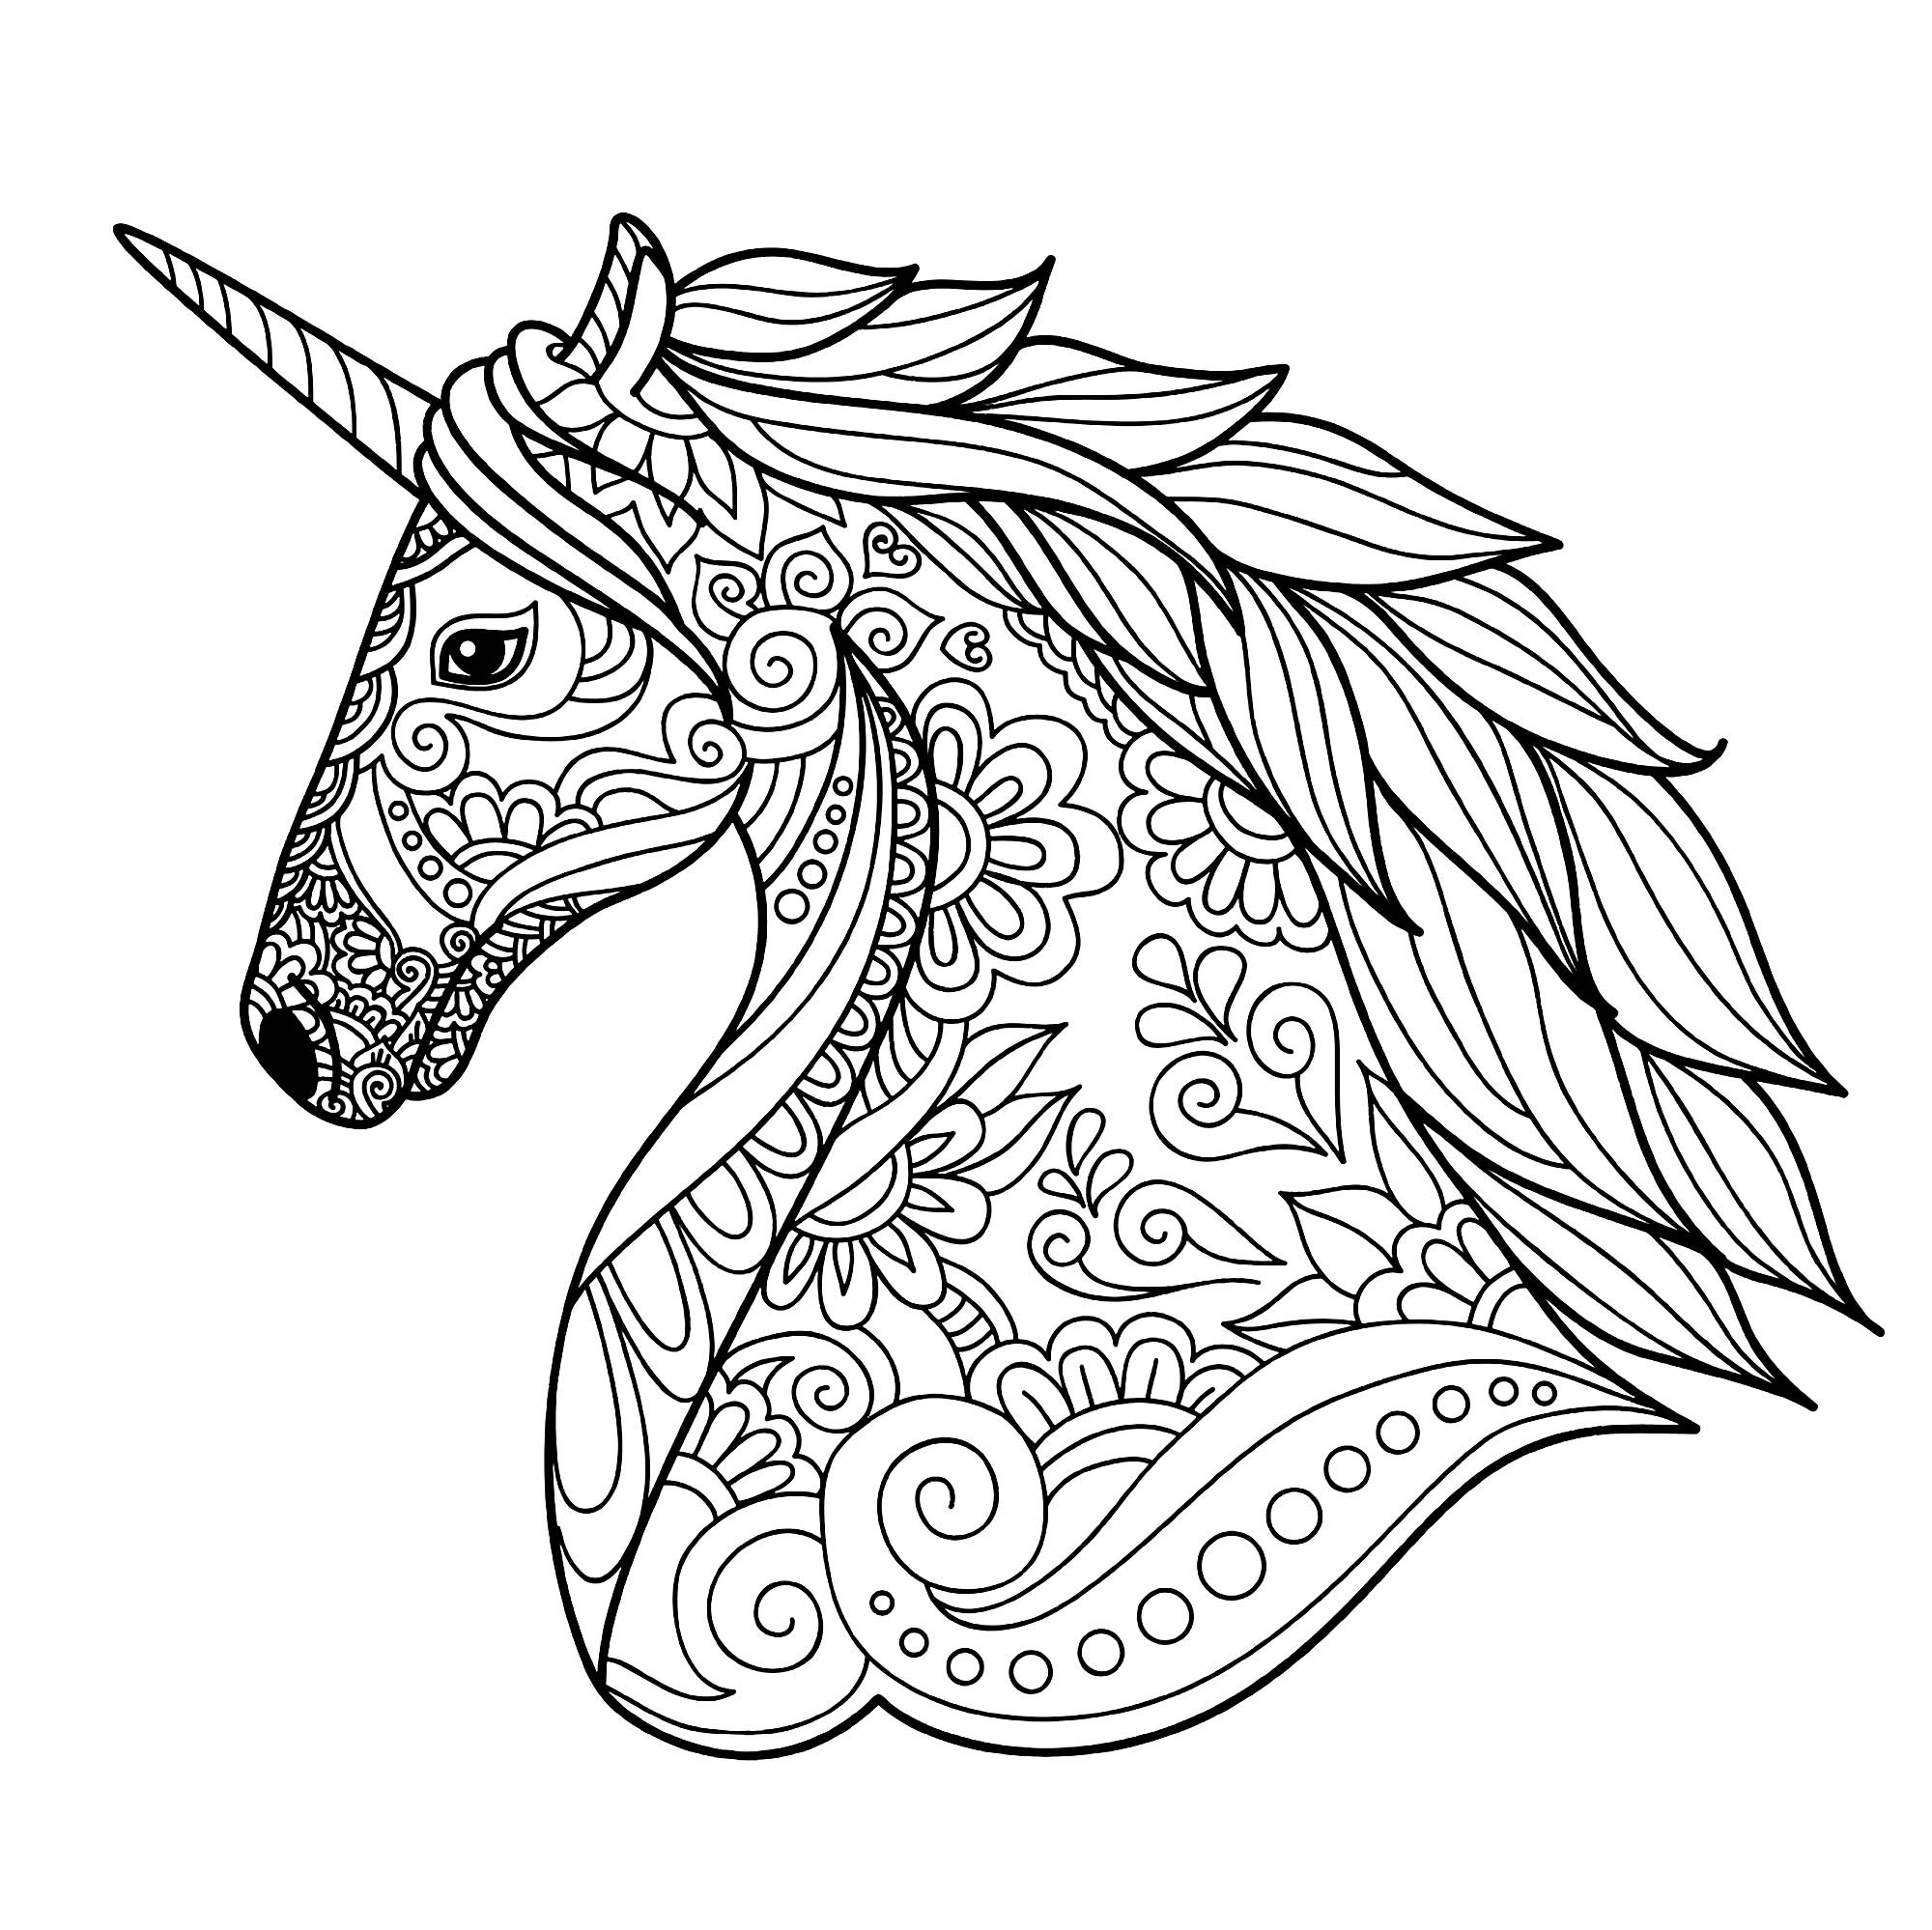 Adult Coloring Pages Unicorn
 Unicorn head simple Unicorns Adult Coloring Pages